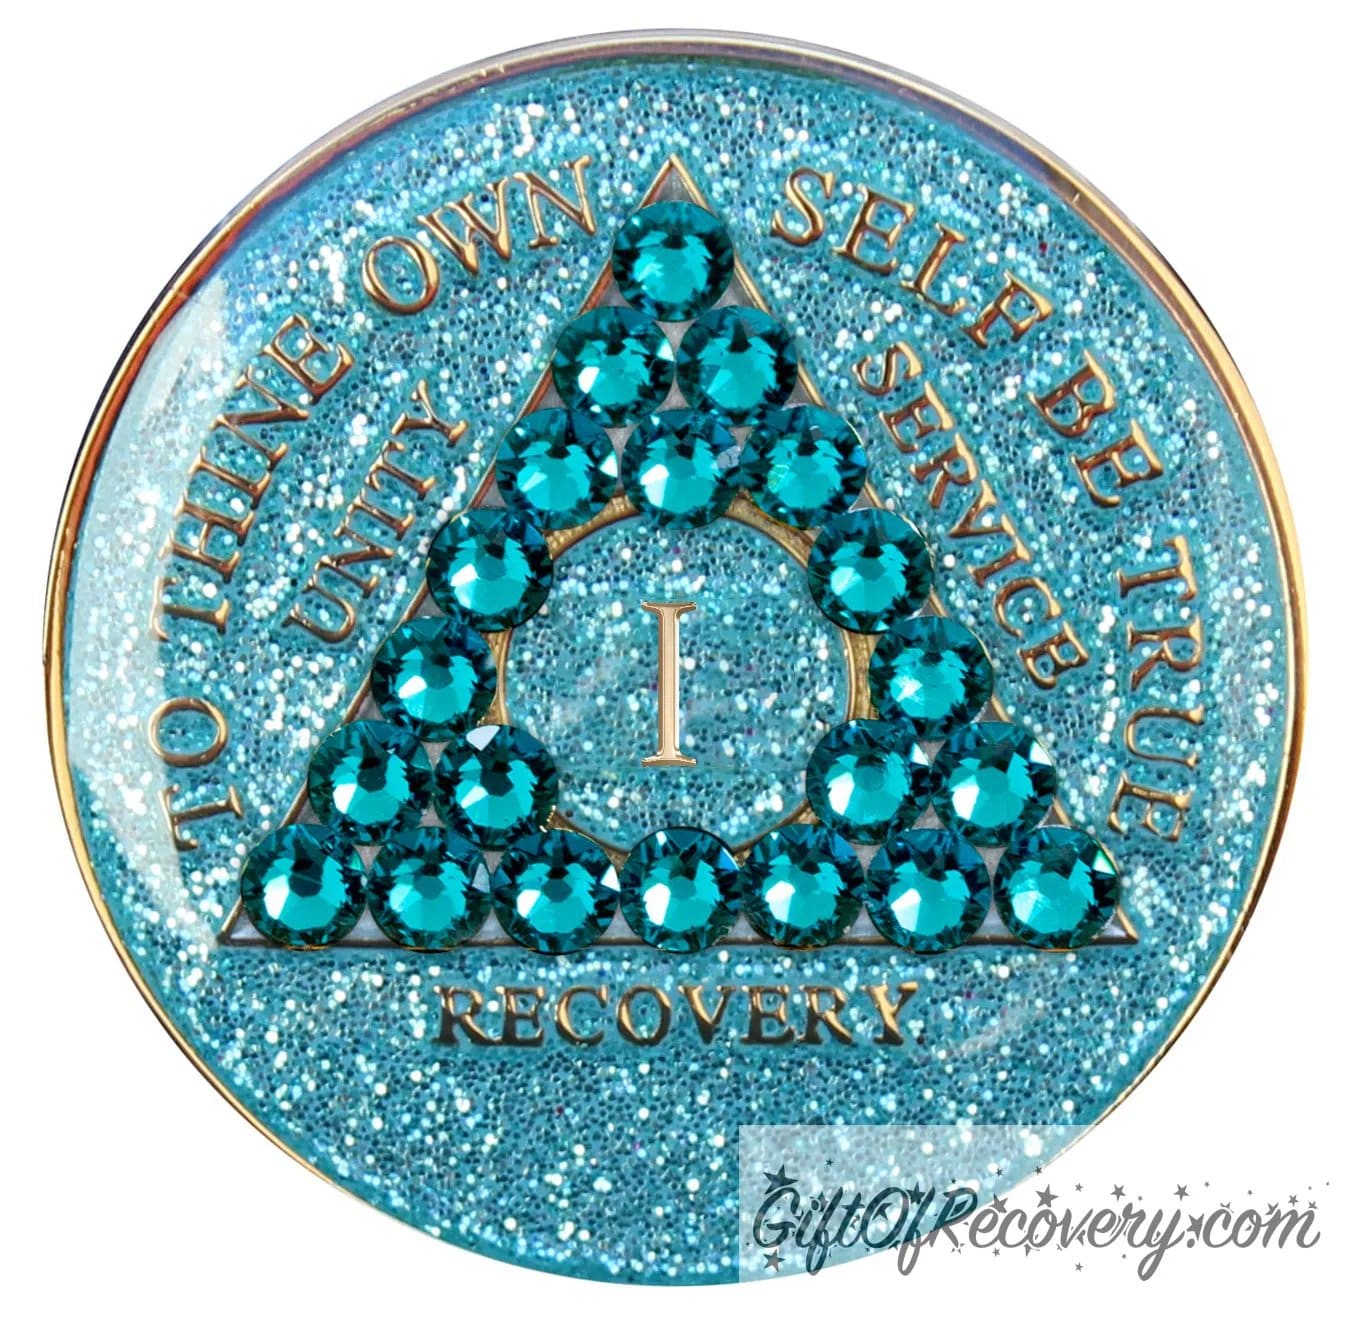 1 year AA medallion in aqua glitter with to thine own self be true, unity, service, recovery, the roman numeral in the center, and the outer rim of the medallion embossed in 14k gold plated brass, the center triangle has 21 genuine blue zircon crystal to give it a sparkle, it is sealed with resin for a shiny finish. 